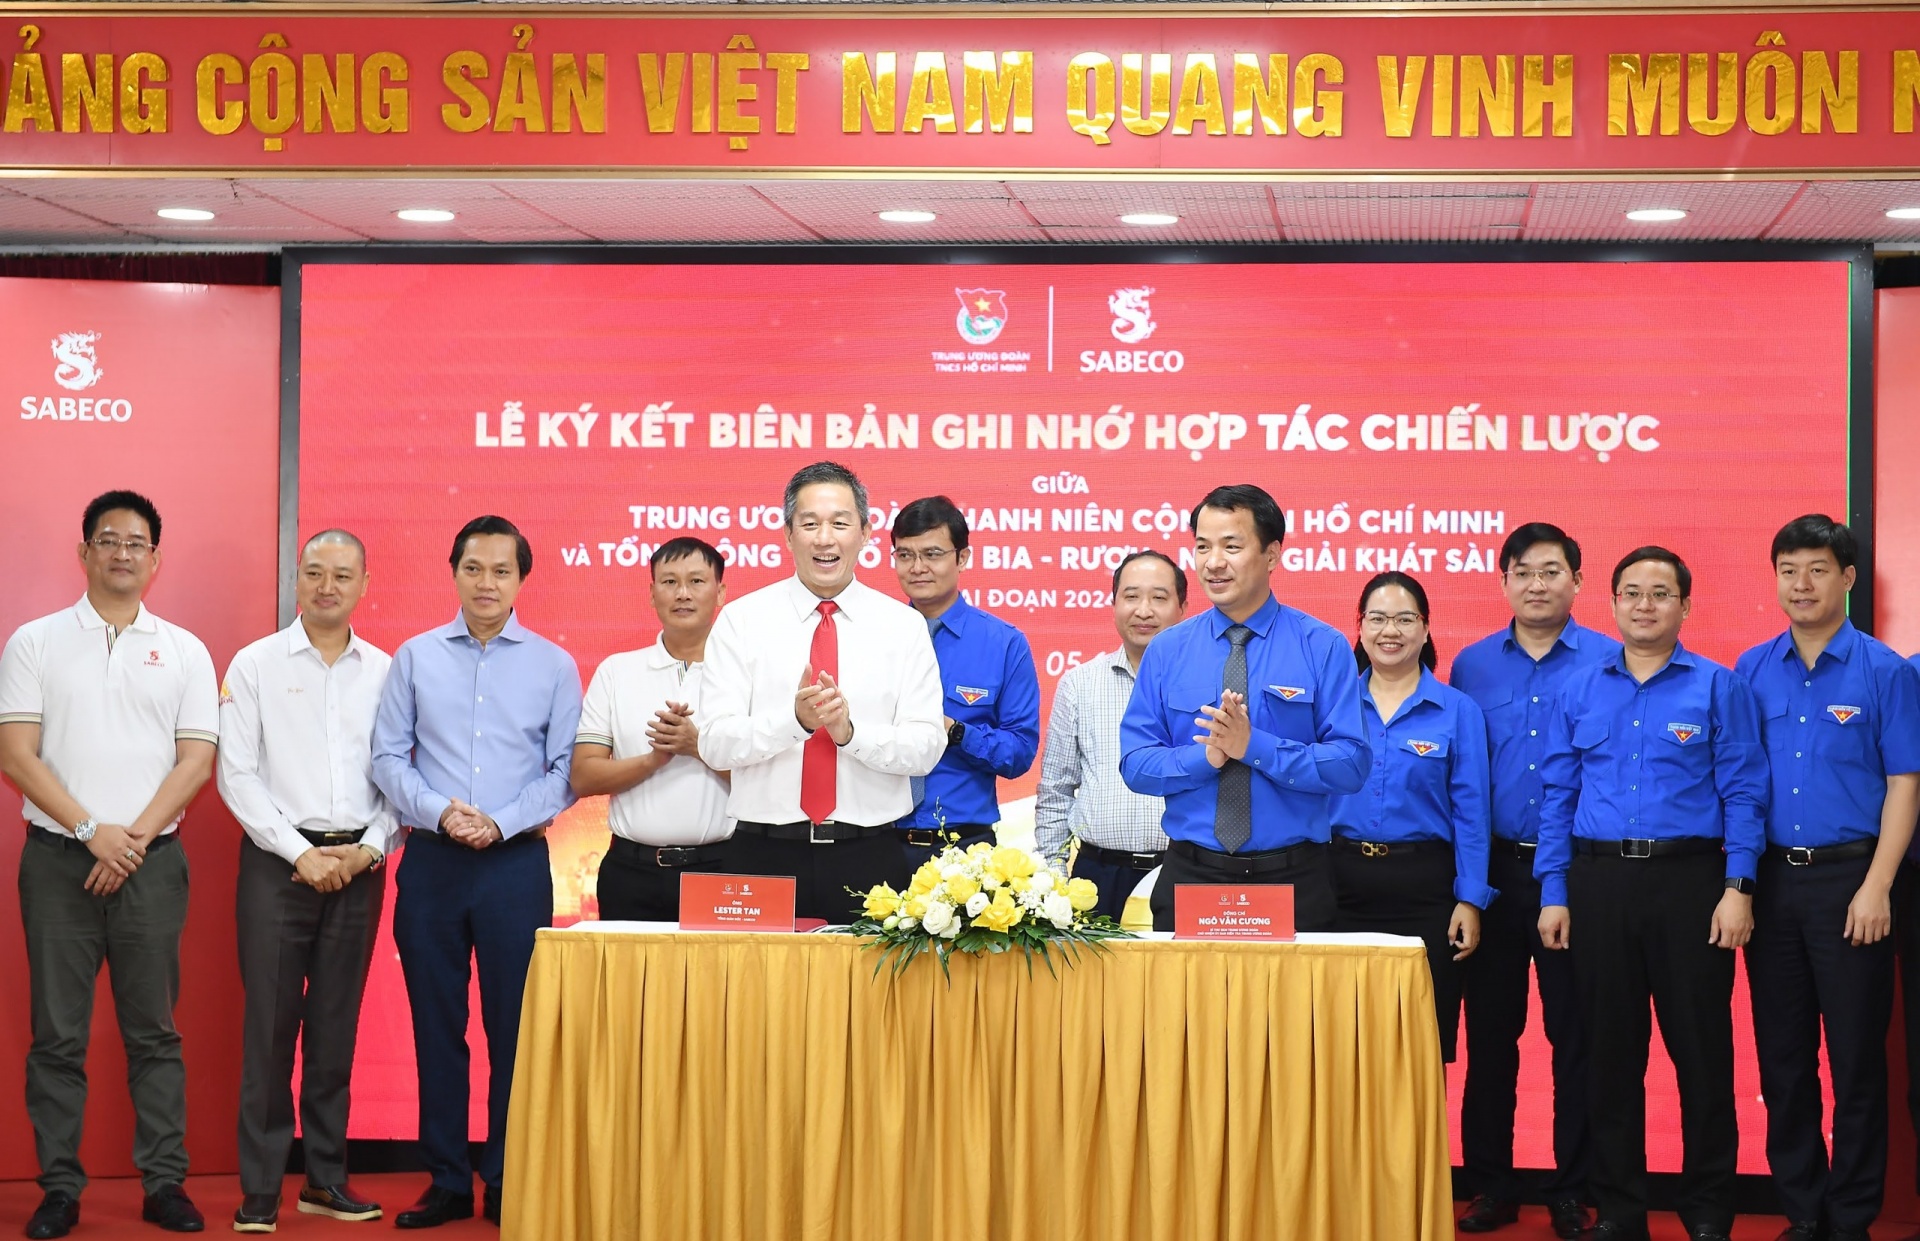 SABECO and Ho Chi Minh Communist Youth Union extend outreach partnership